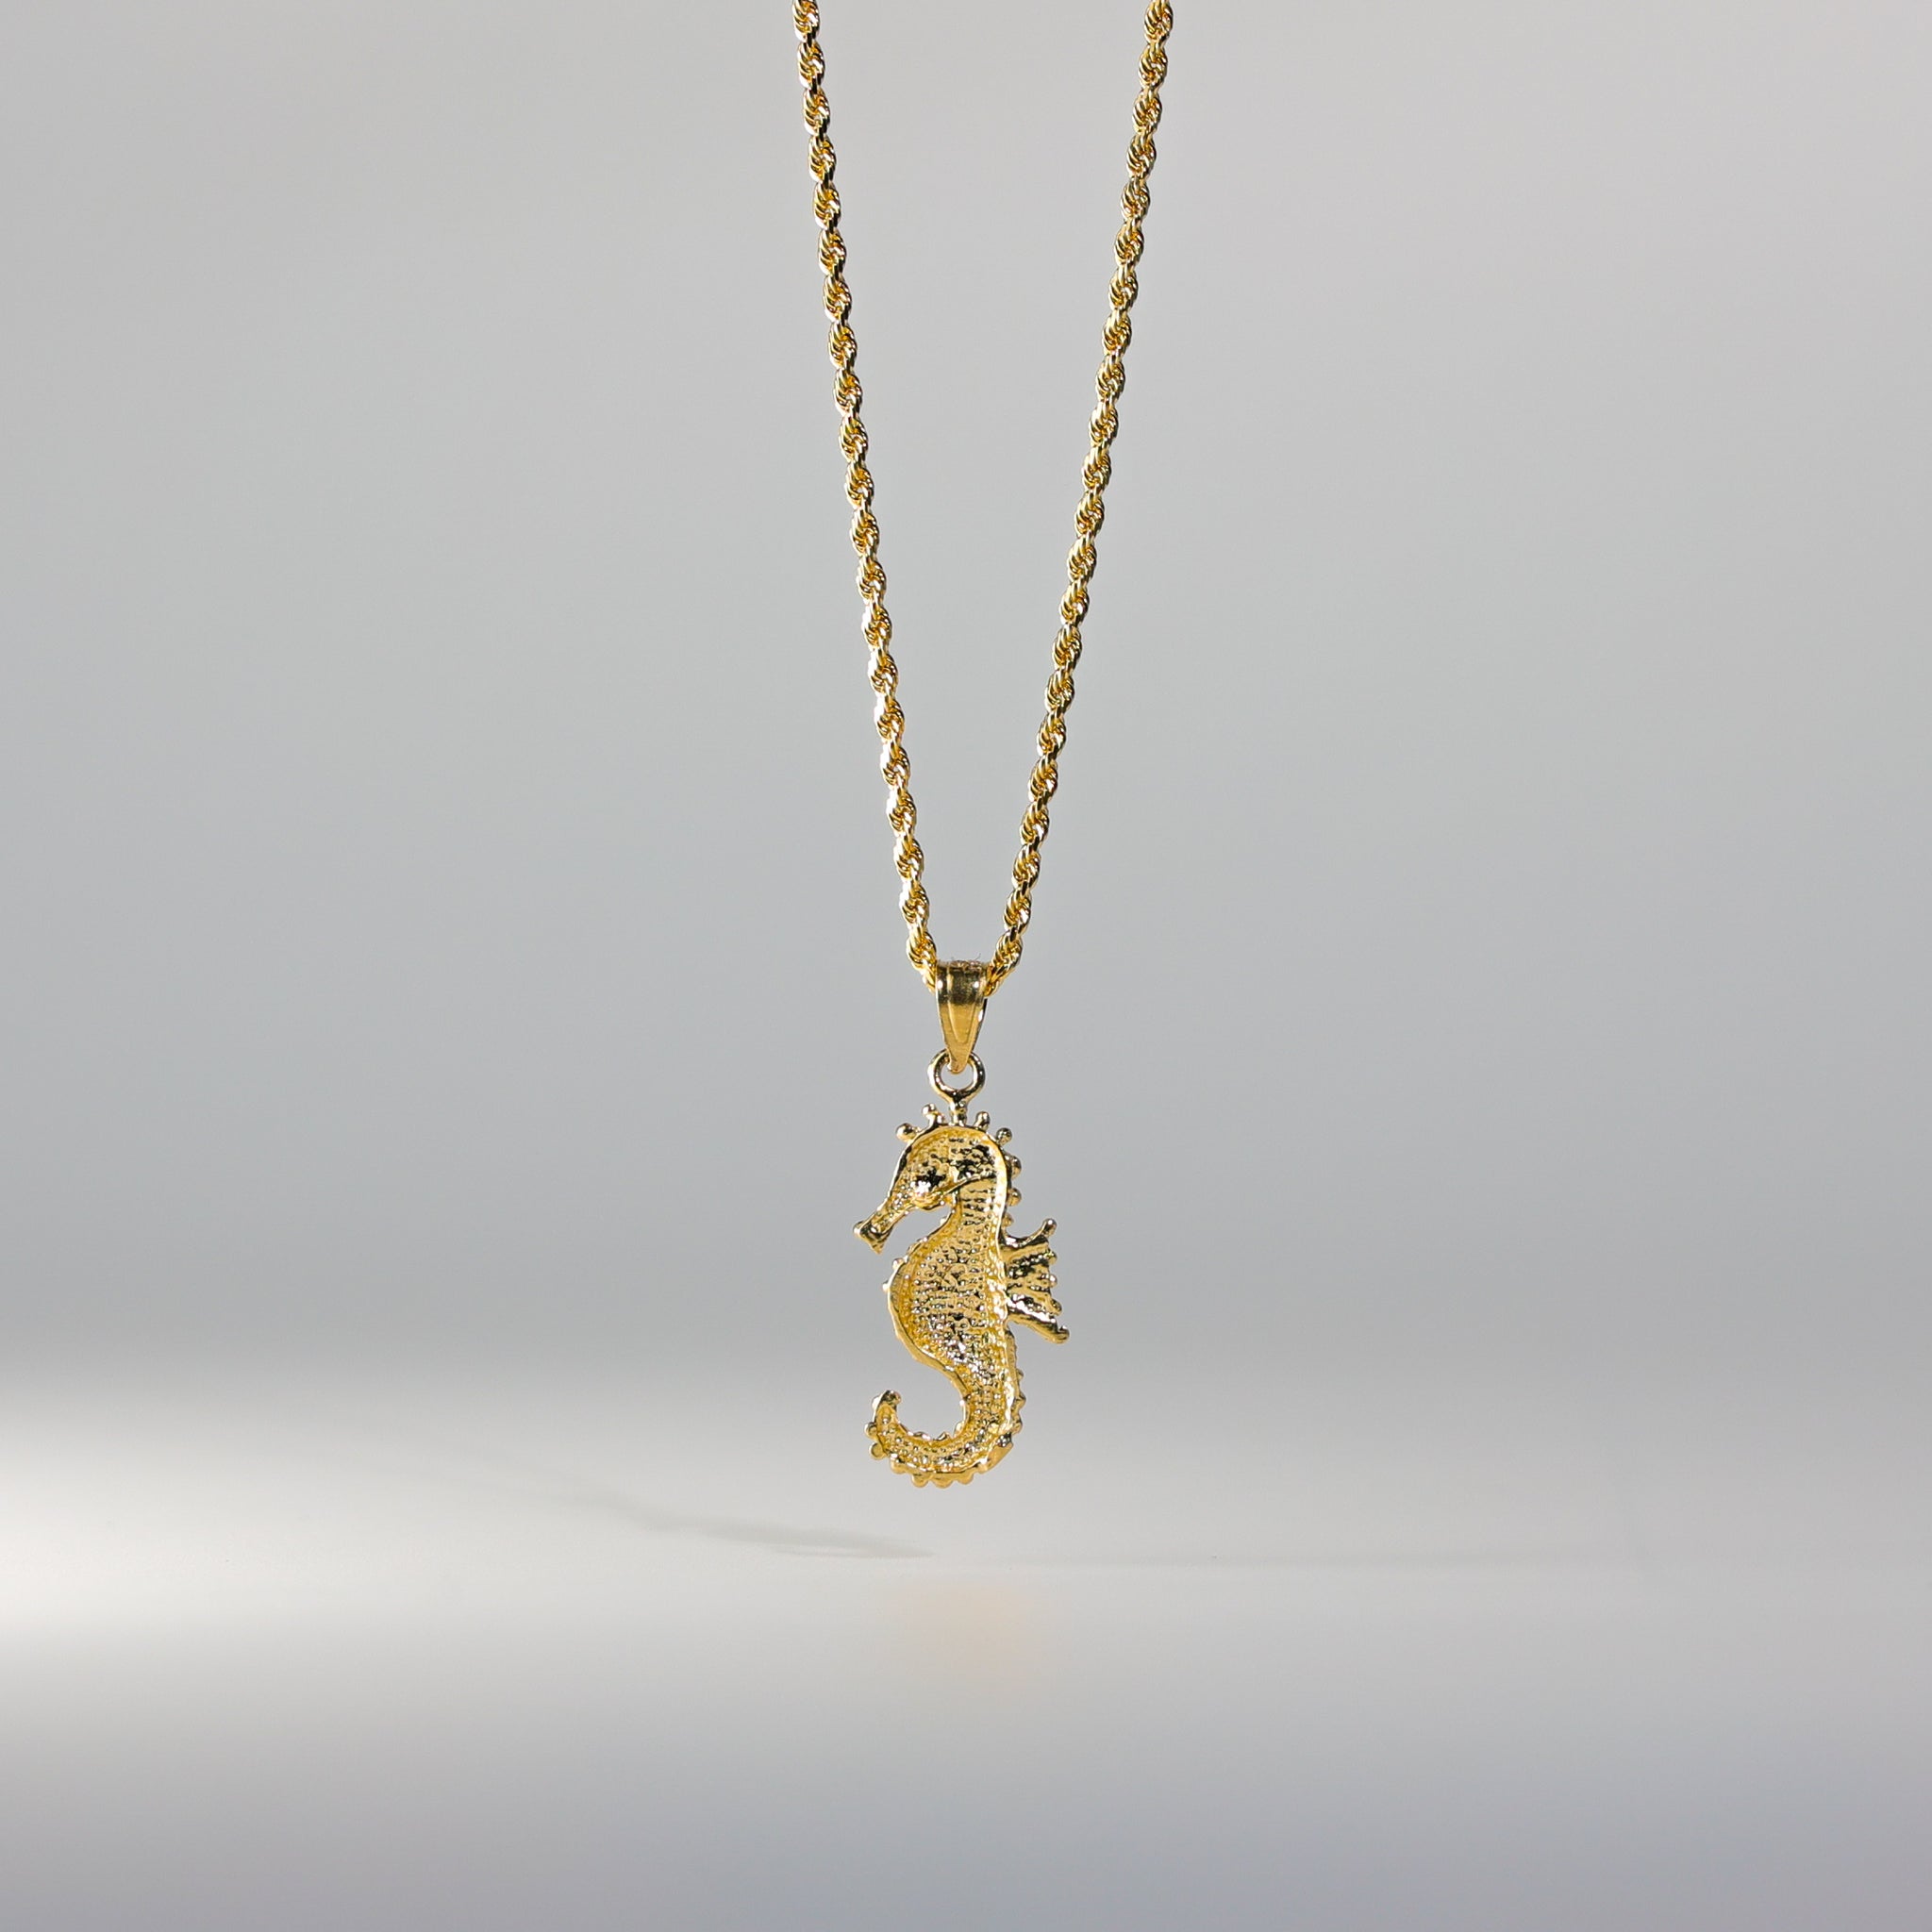 Gold Sea Horse Pendant Model-1687 - Charlie & Co. Jewelry